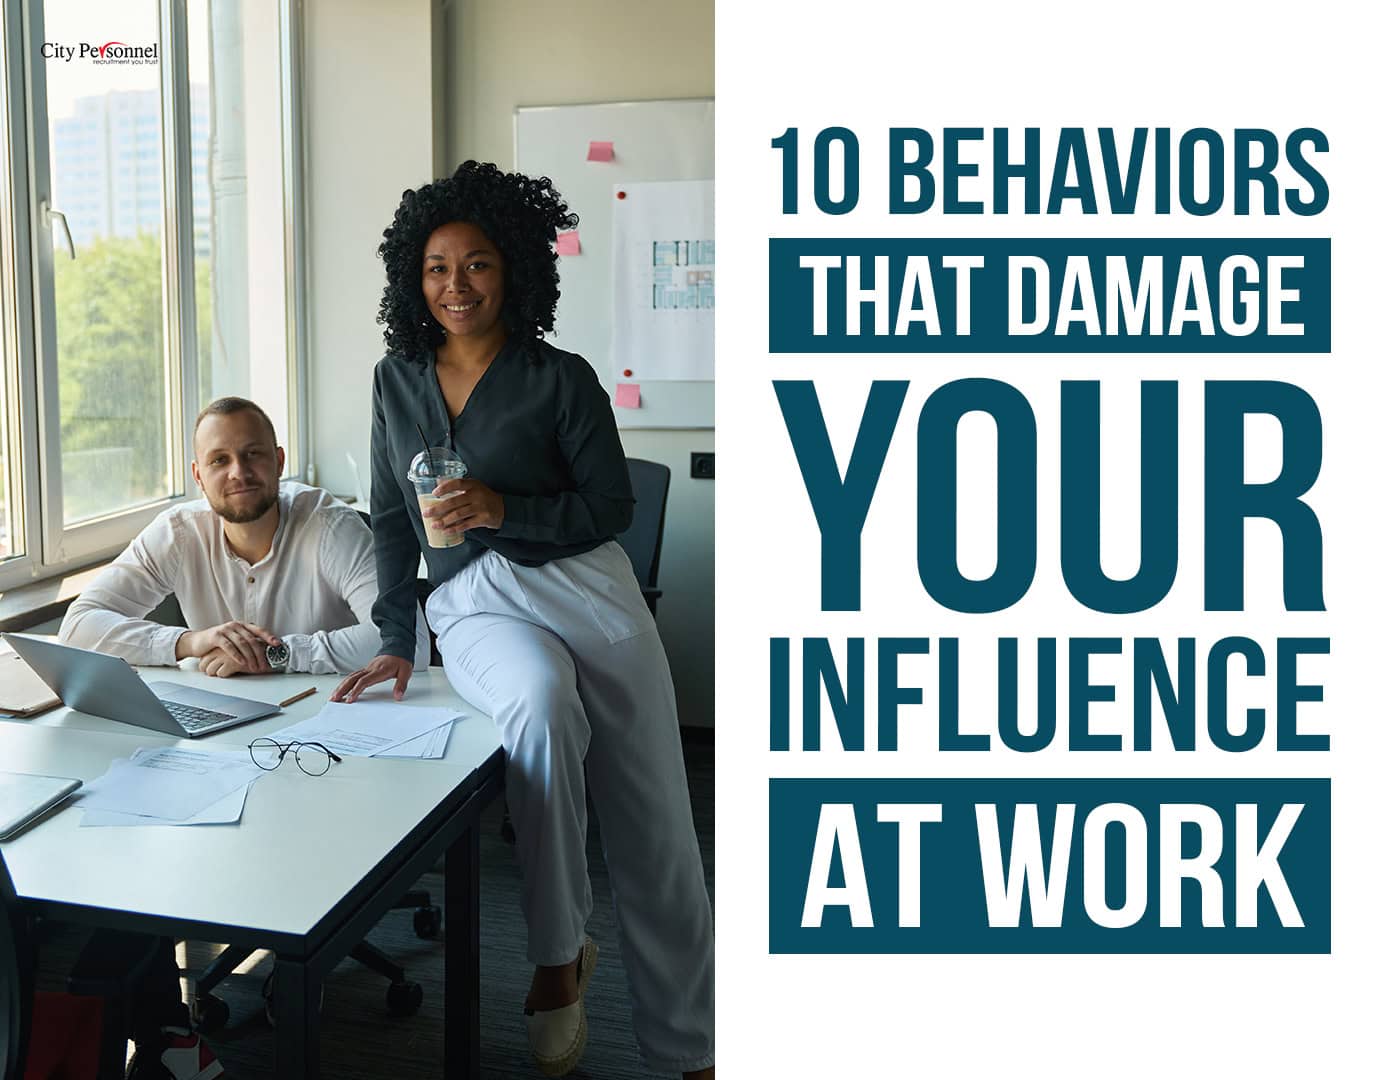 10 Behaviors that Damage Your Influence at Work